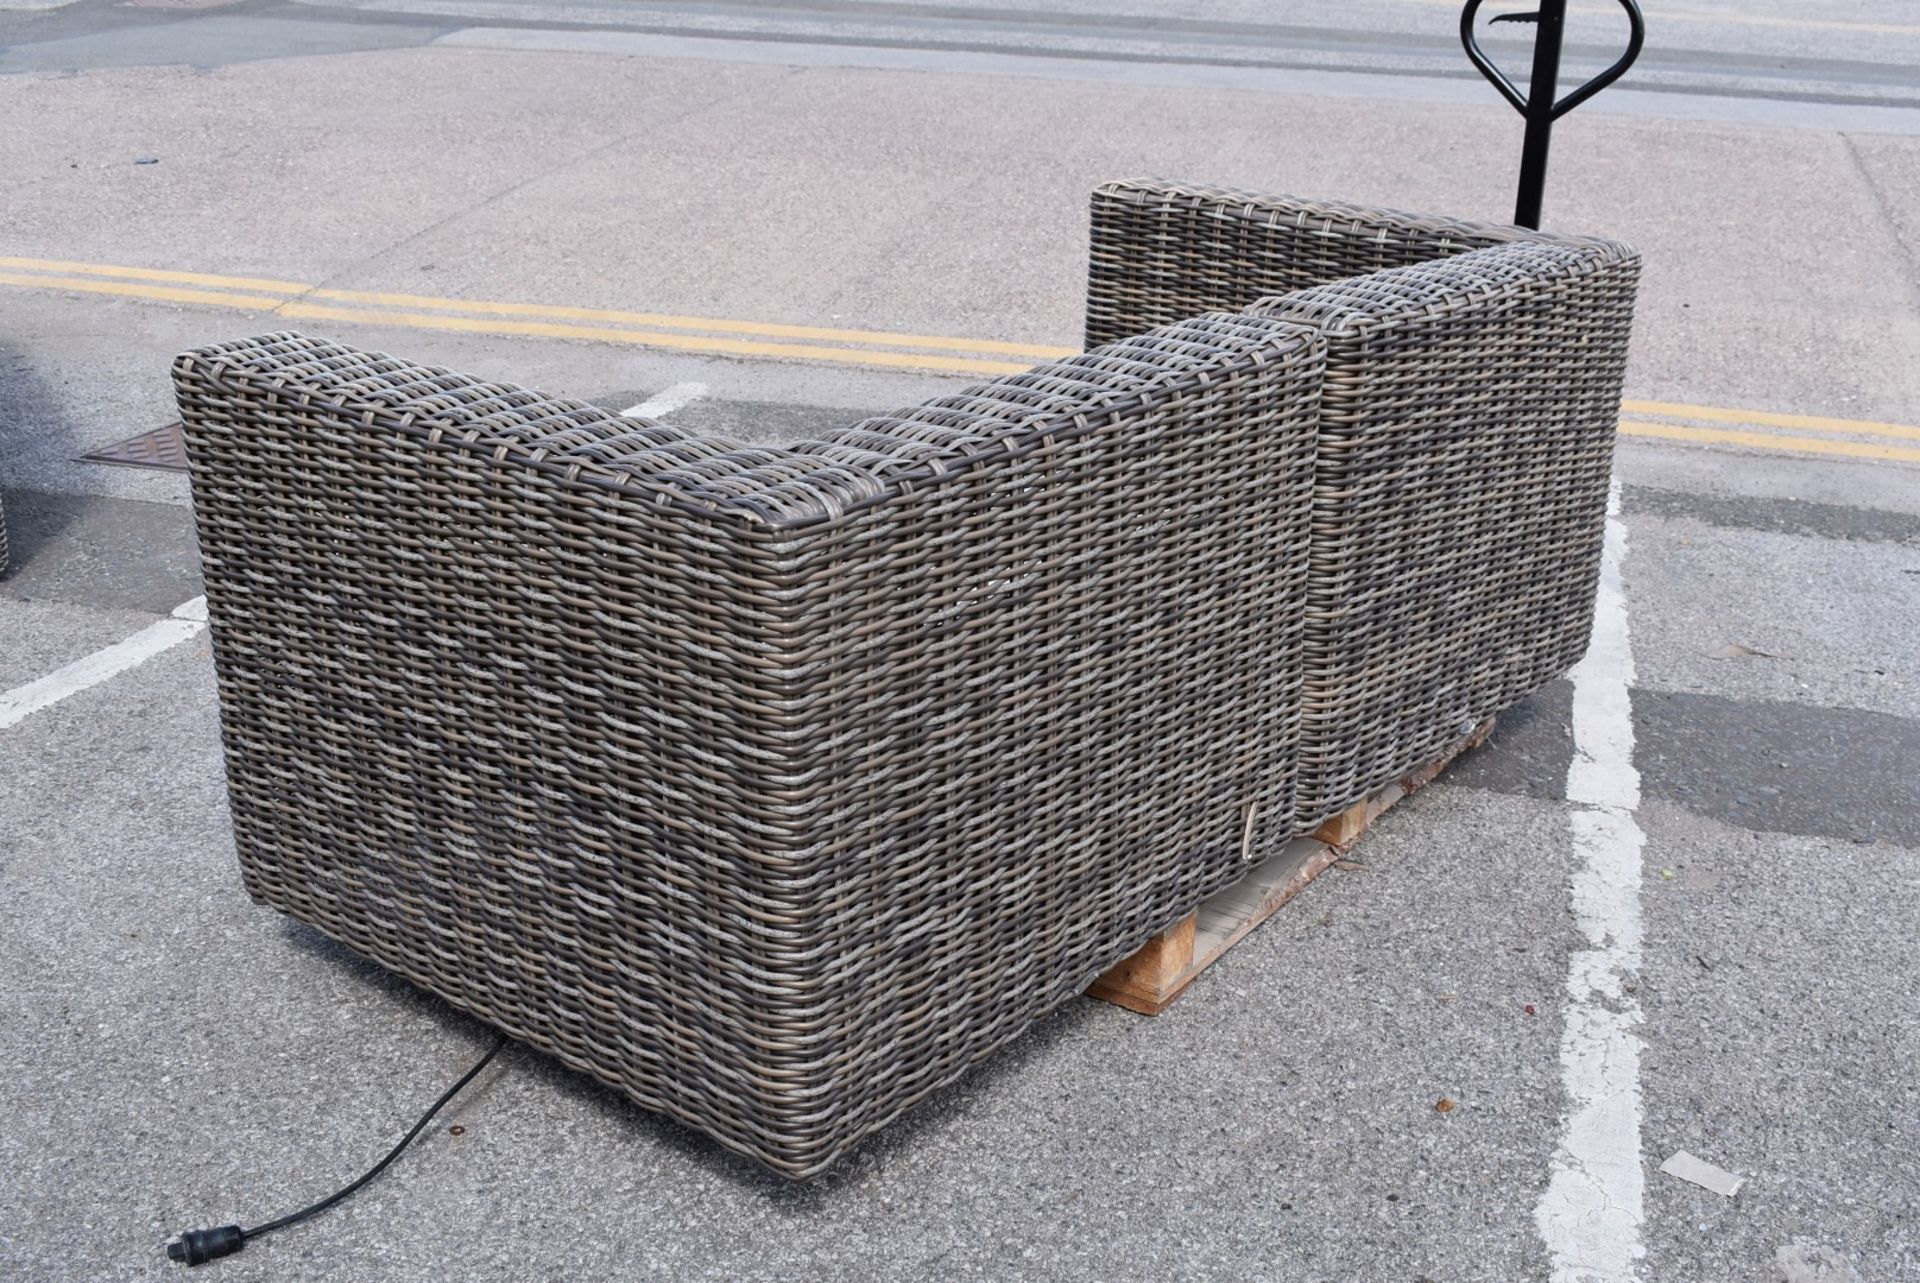 1 x Rattan Garden Furniture Sofa With Heated Seat Pads & Protector Cover - Cushions Not Included - Image 9 of 12